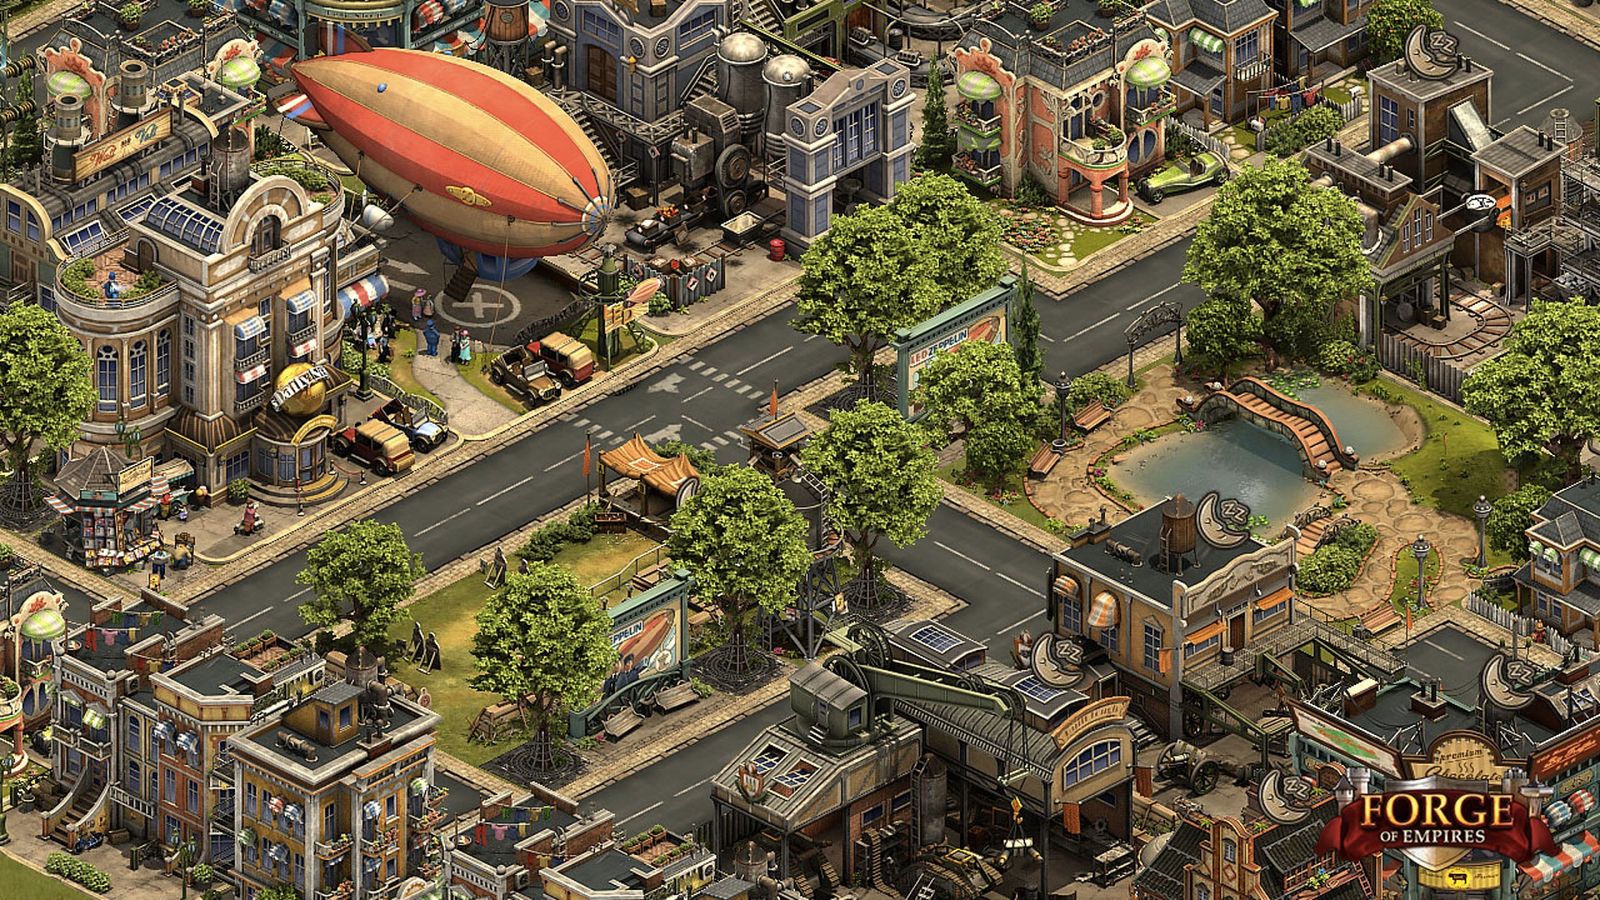 Image of a steampunk town in development in Forge of Empires.